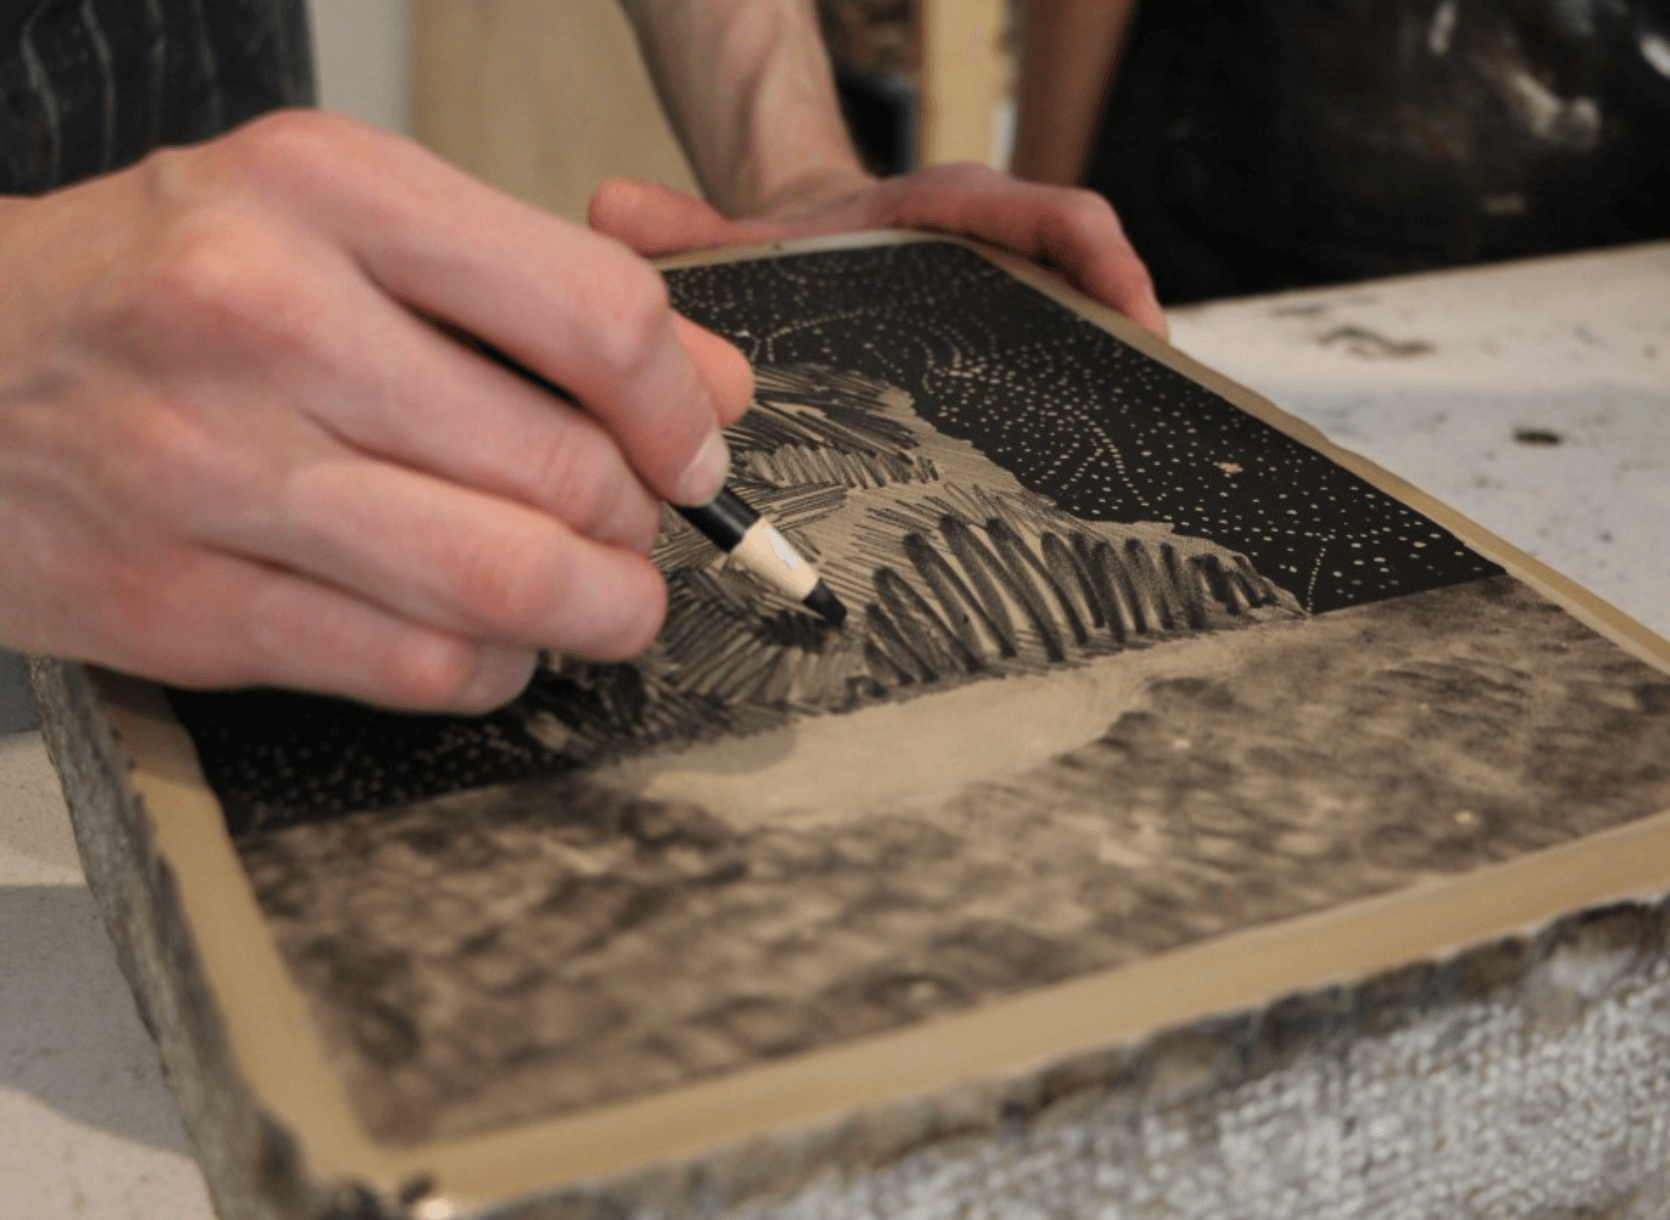 COAT A SOLID SURFACE WITH INK USING LITHOGRAPHY